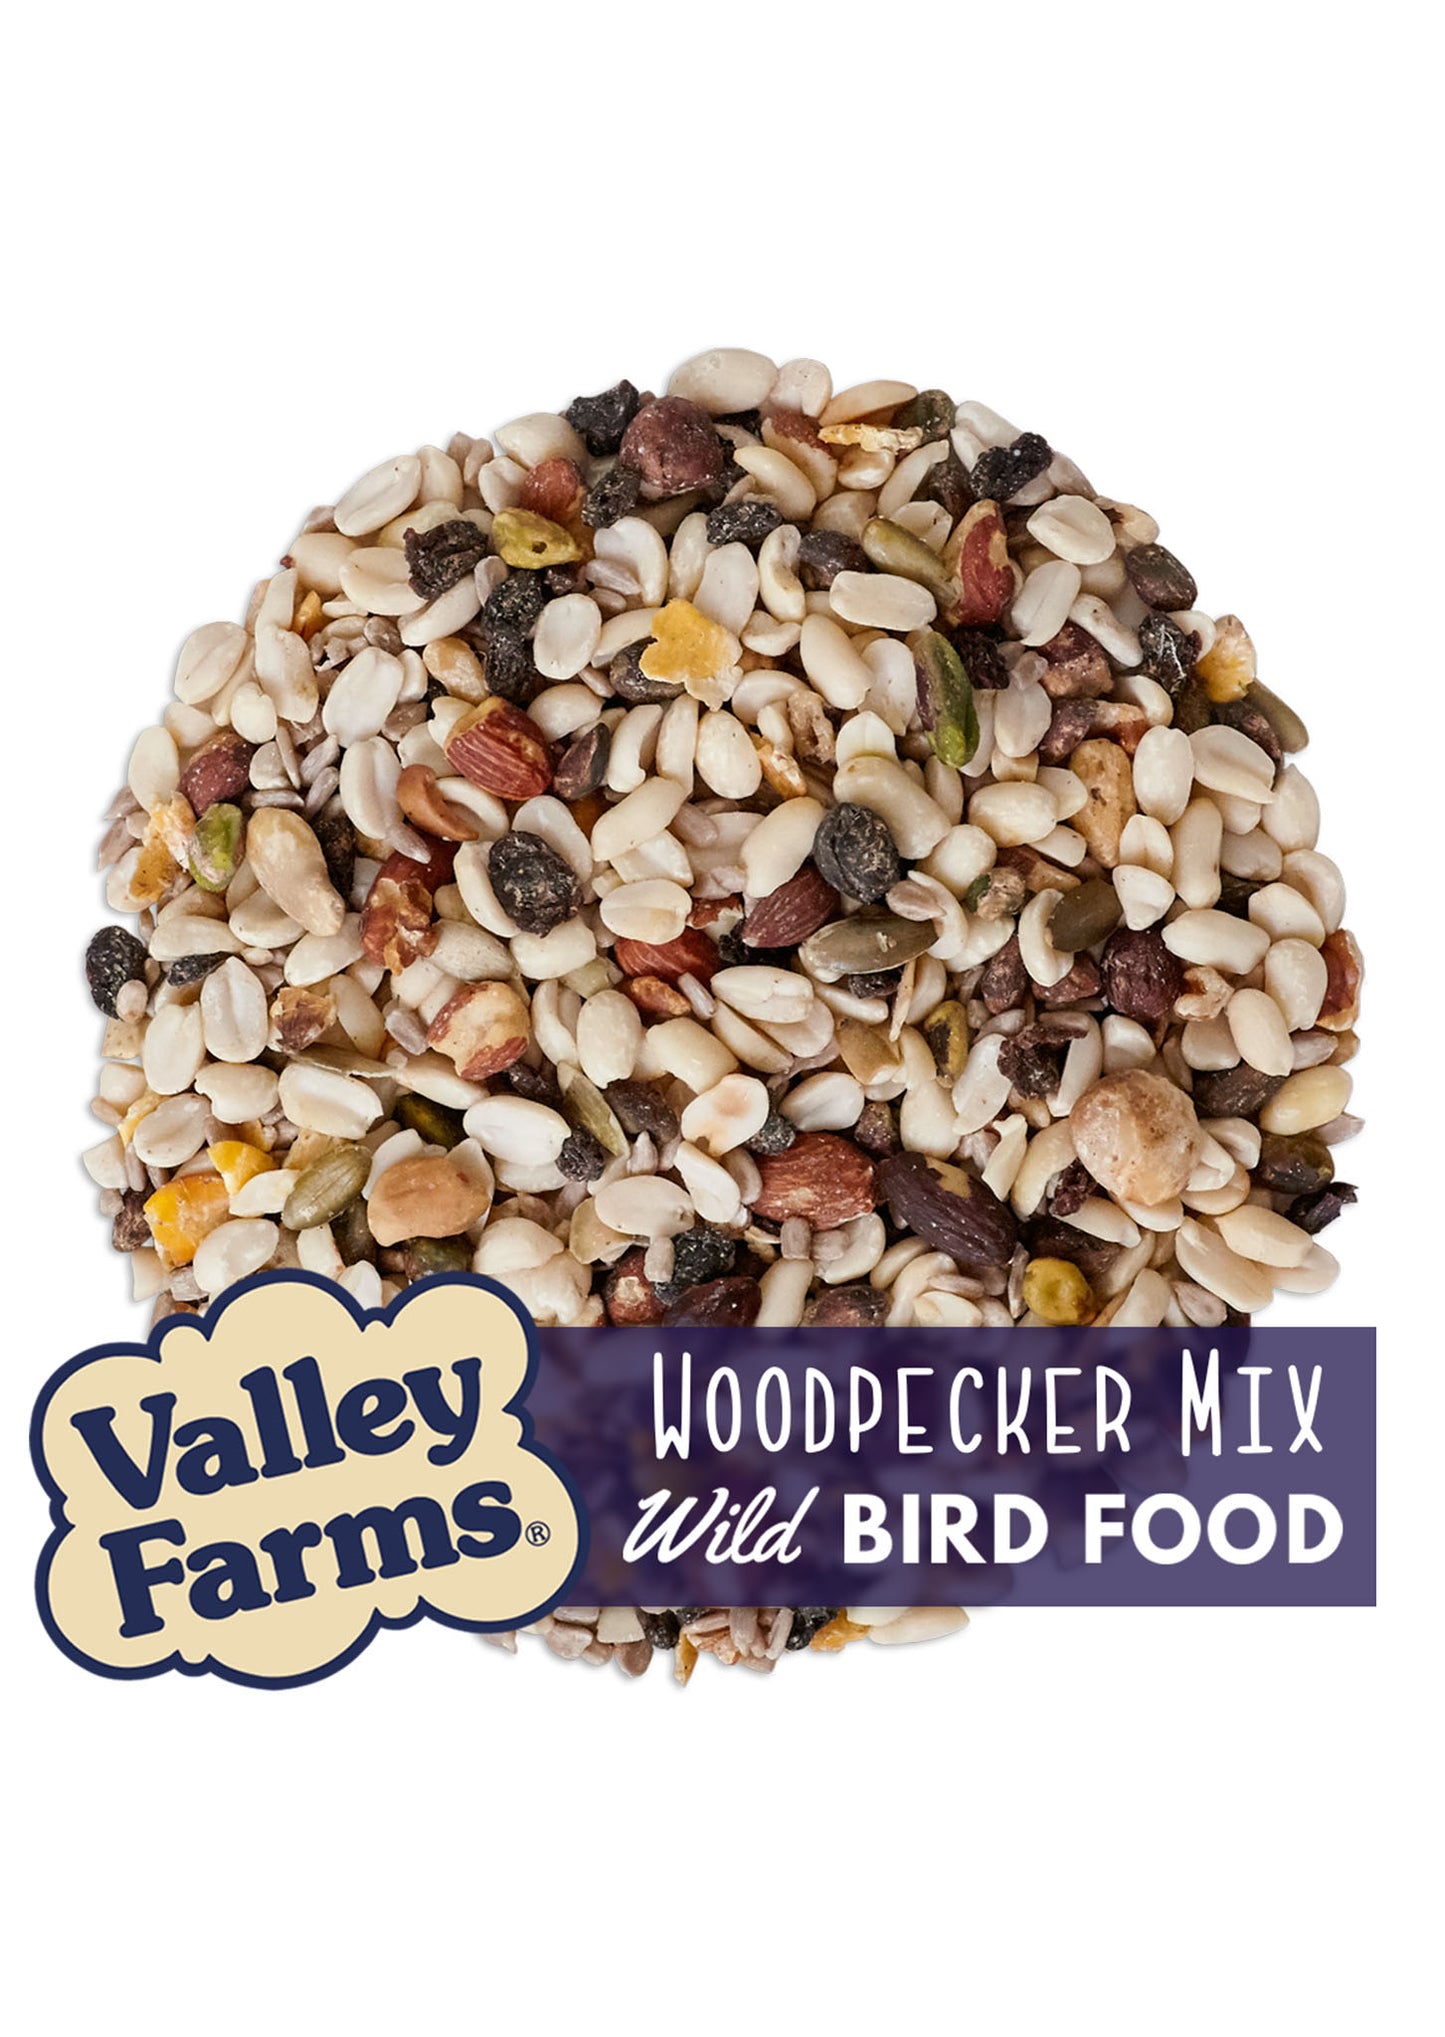 Valley Farms Woodpecker Mix Wild Bird Food with Sunflower Hearts!